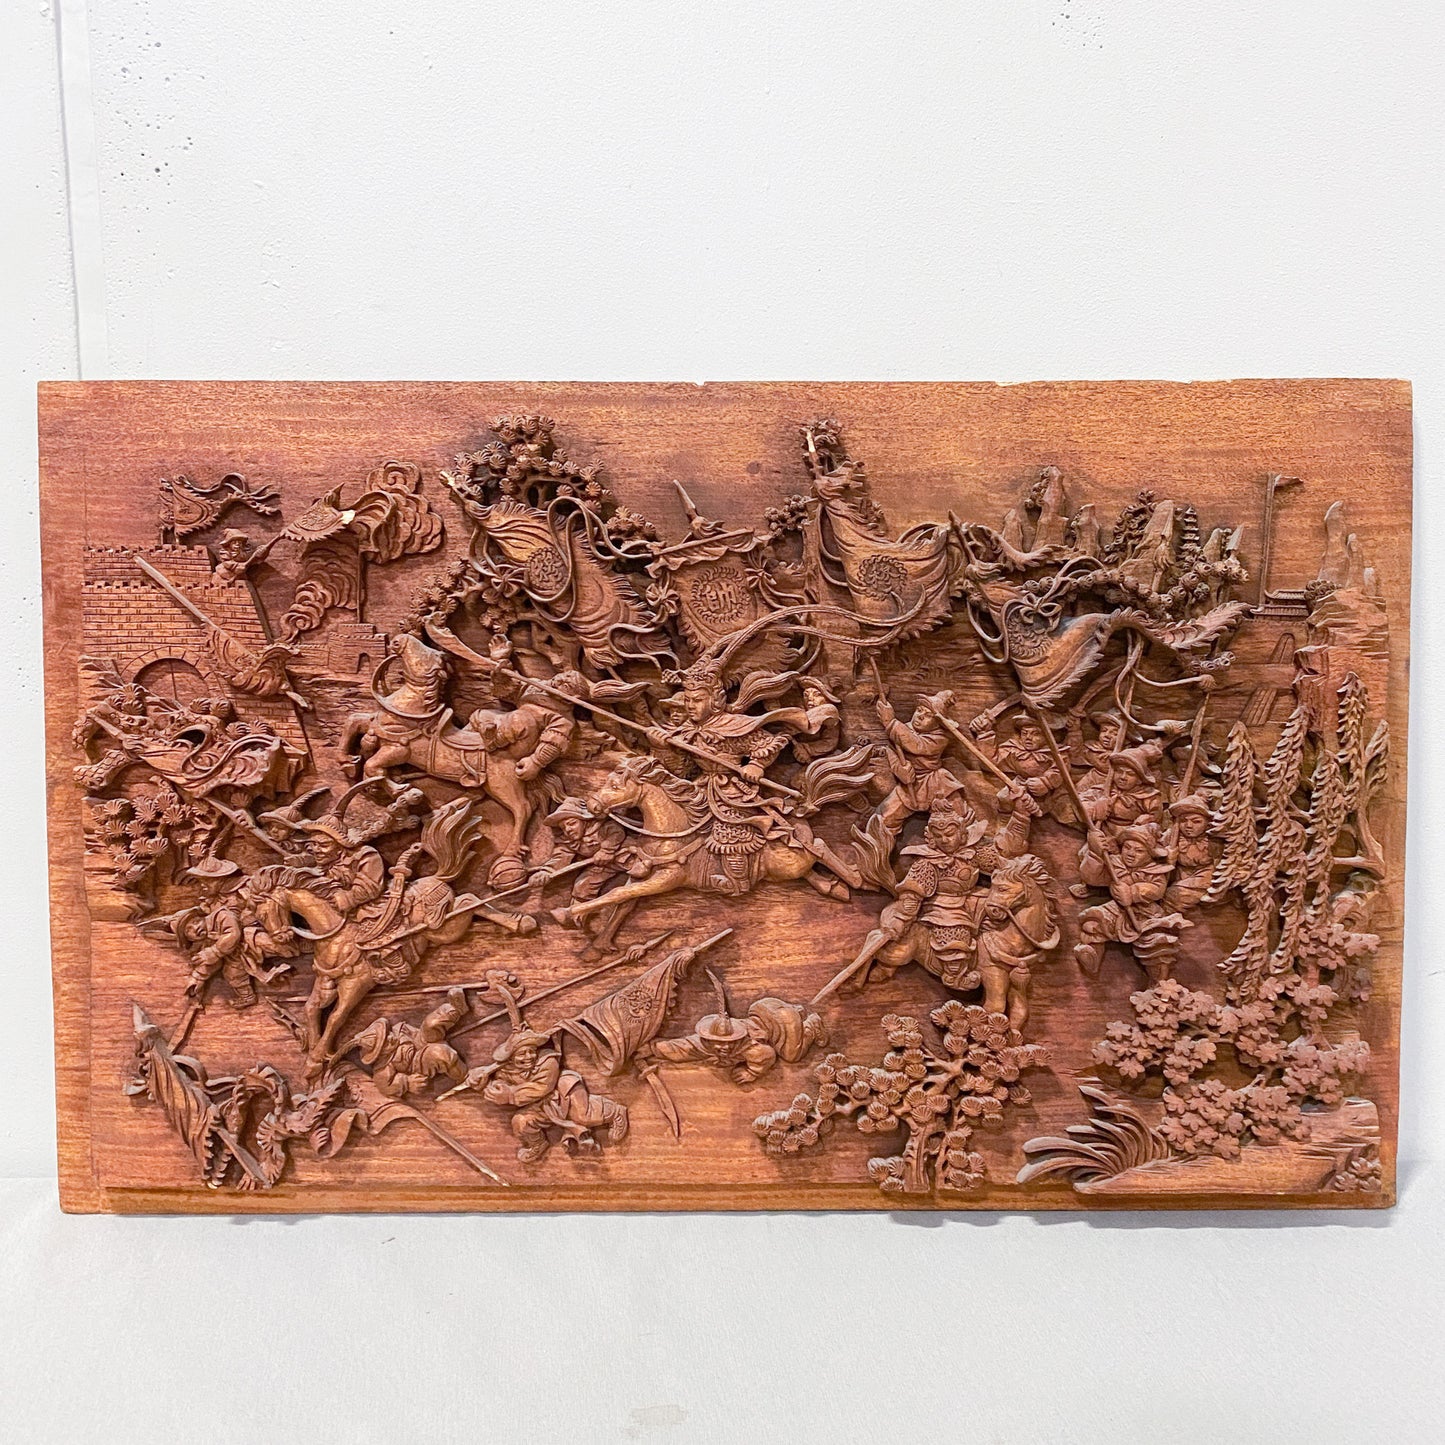 22" x 35" Carved Wooden Wall Art